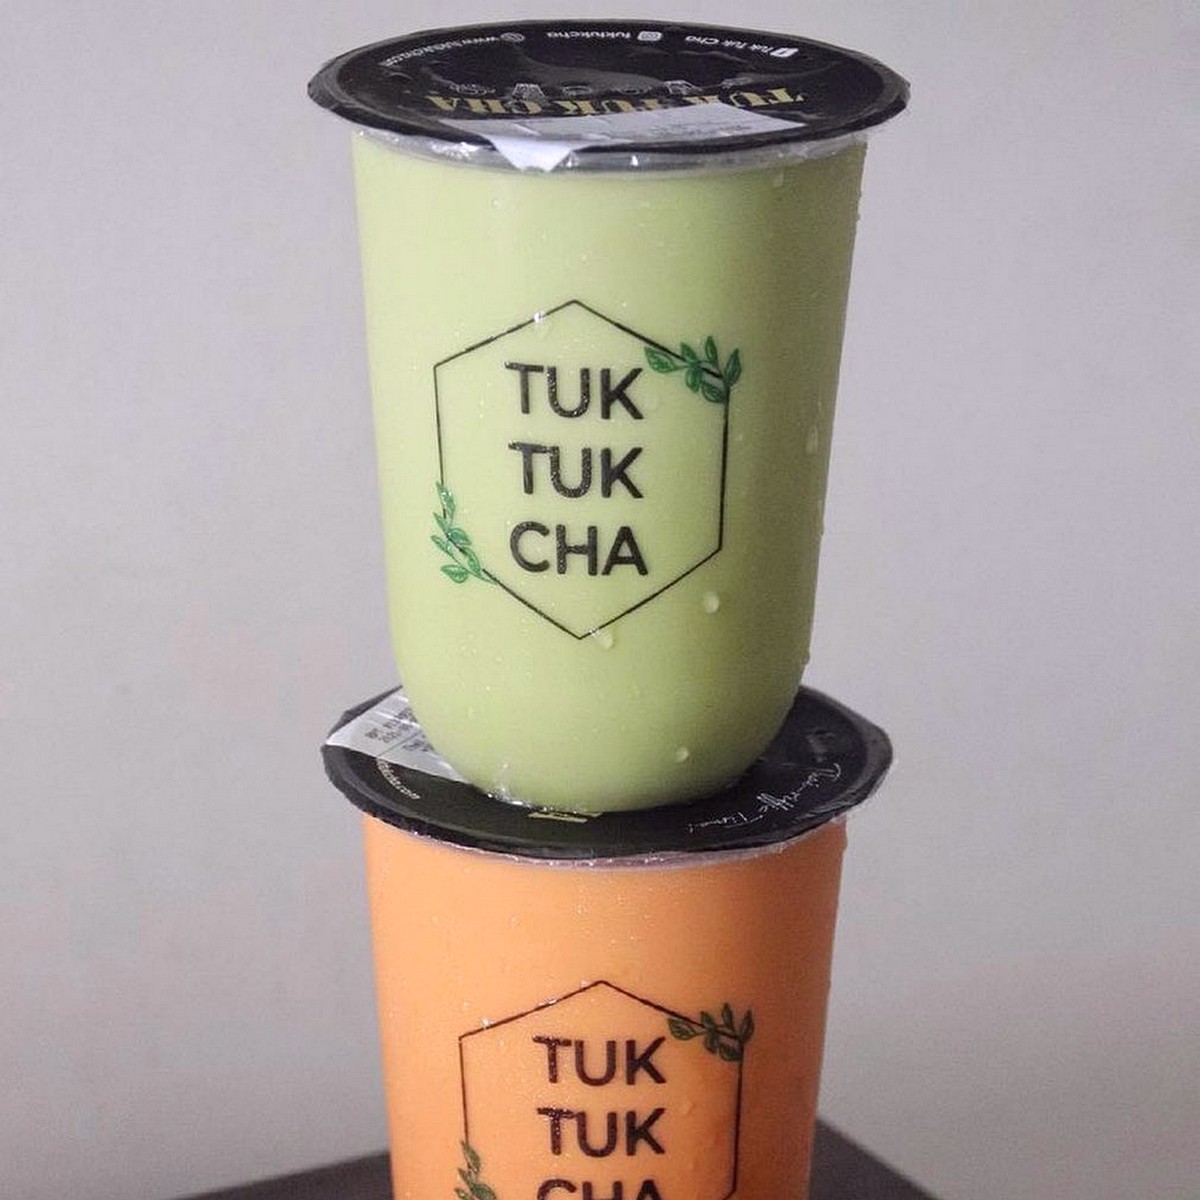 Tuk-Tuk-Cha-Limited-Time-Offers-1-for-1-Promo-Singapore-2021-Beverages-Offers-Warehouse-Sale-Clearance-Islandwide Now till 4 Jun 2021: Tuk Tuk Cha 1-FOR-1 Thai Milk Tea Promo All-Day at 3 selected outlets in Singapore